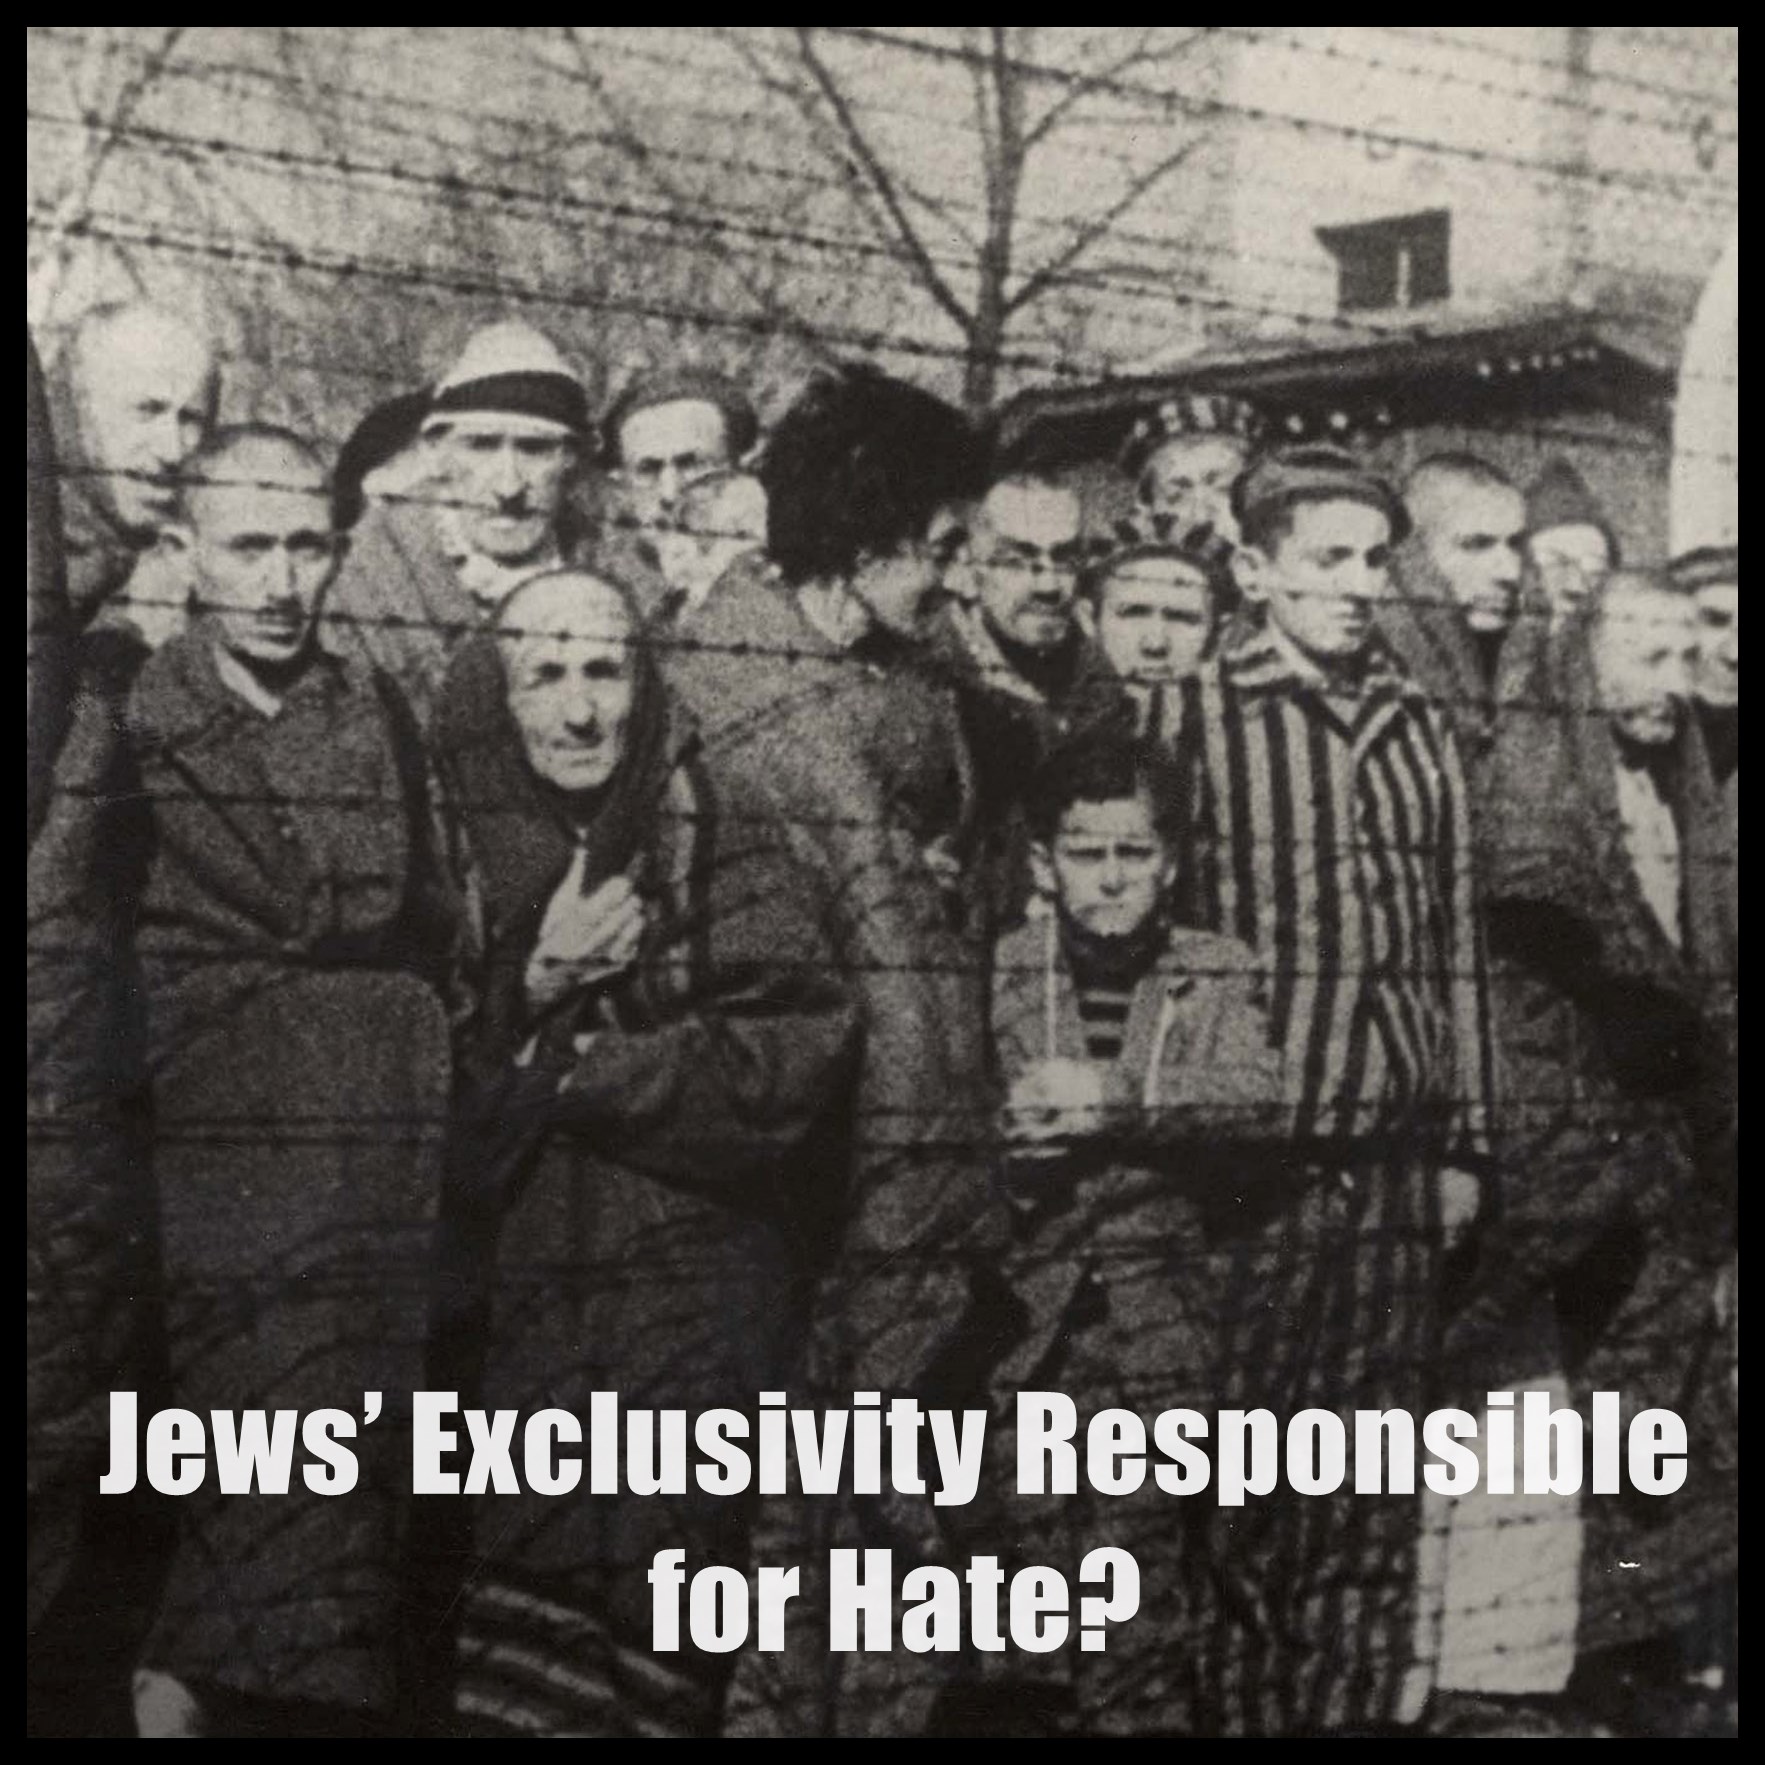 Are the Jews’ Exclusivity Responsible for Hate